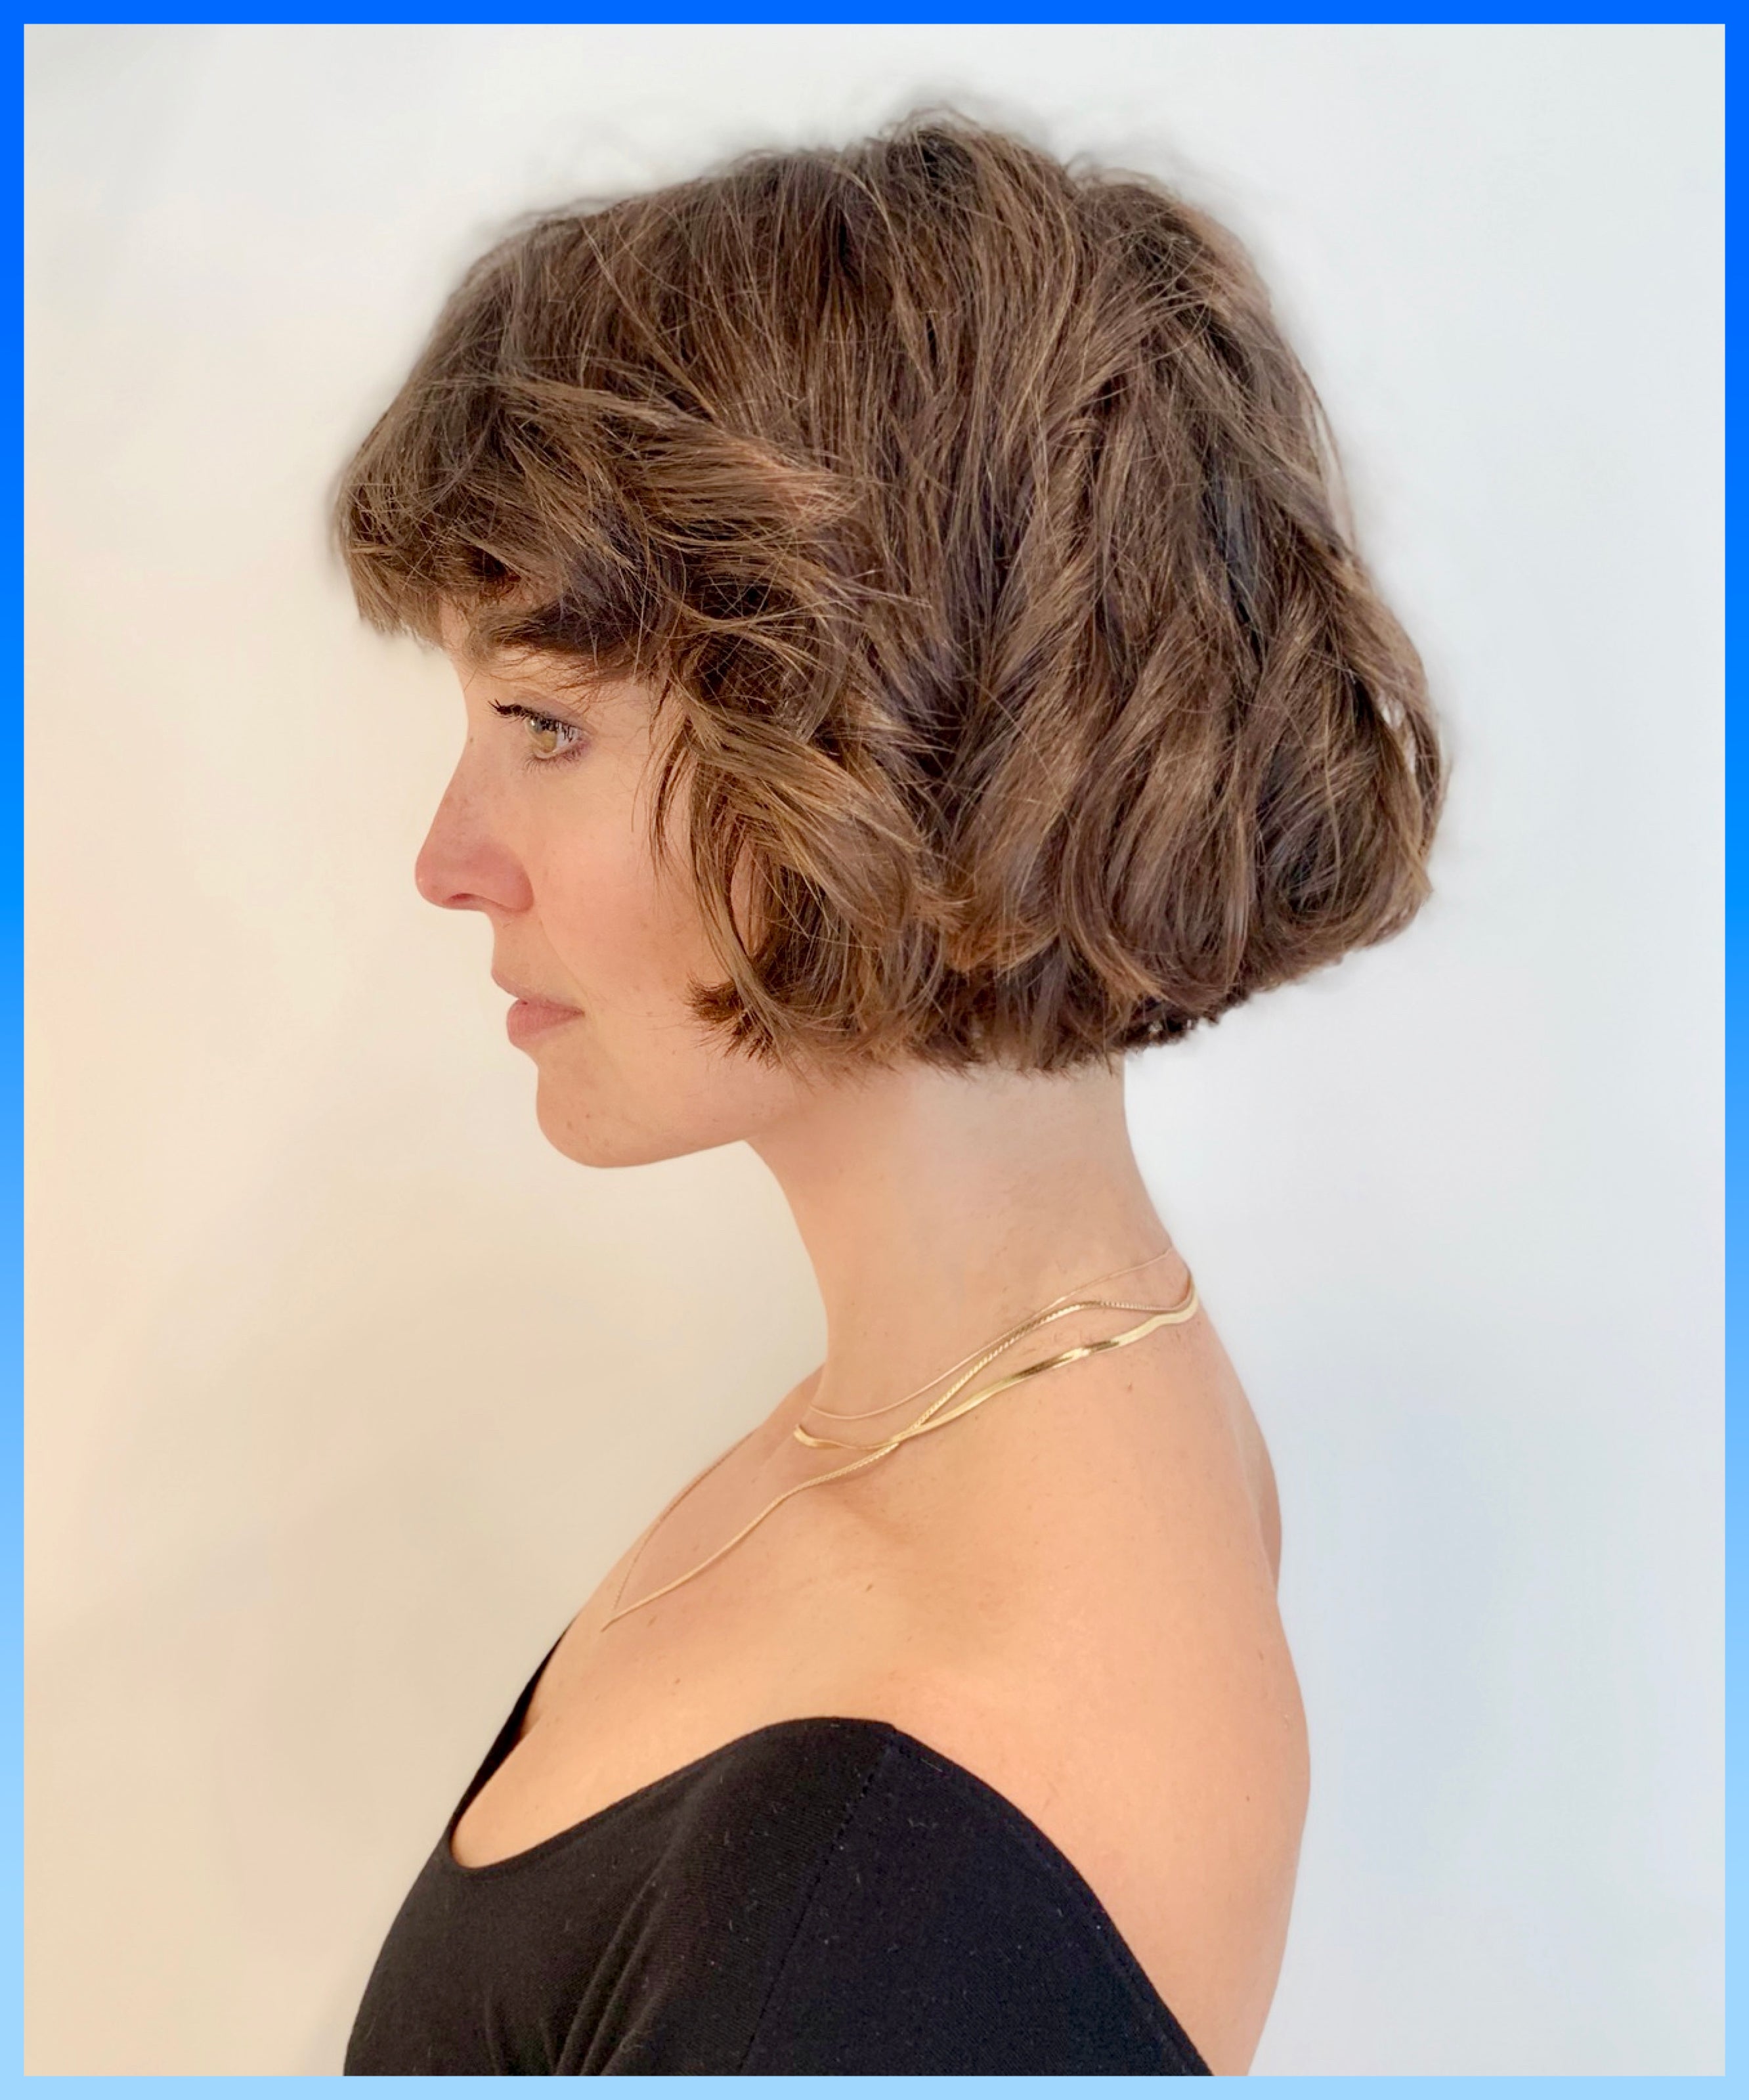 Cool Effortless French-Girl Haircut Trend For Autumn